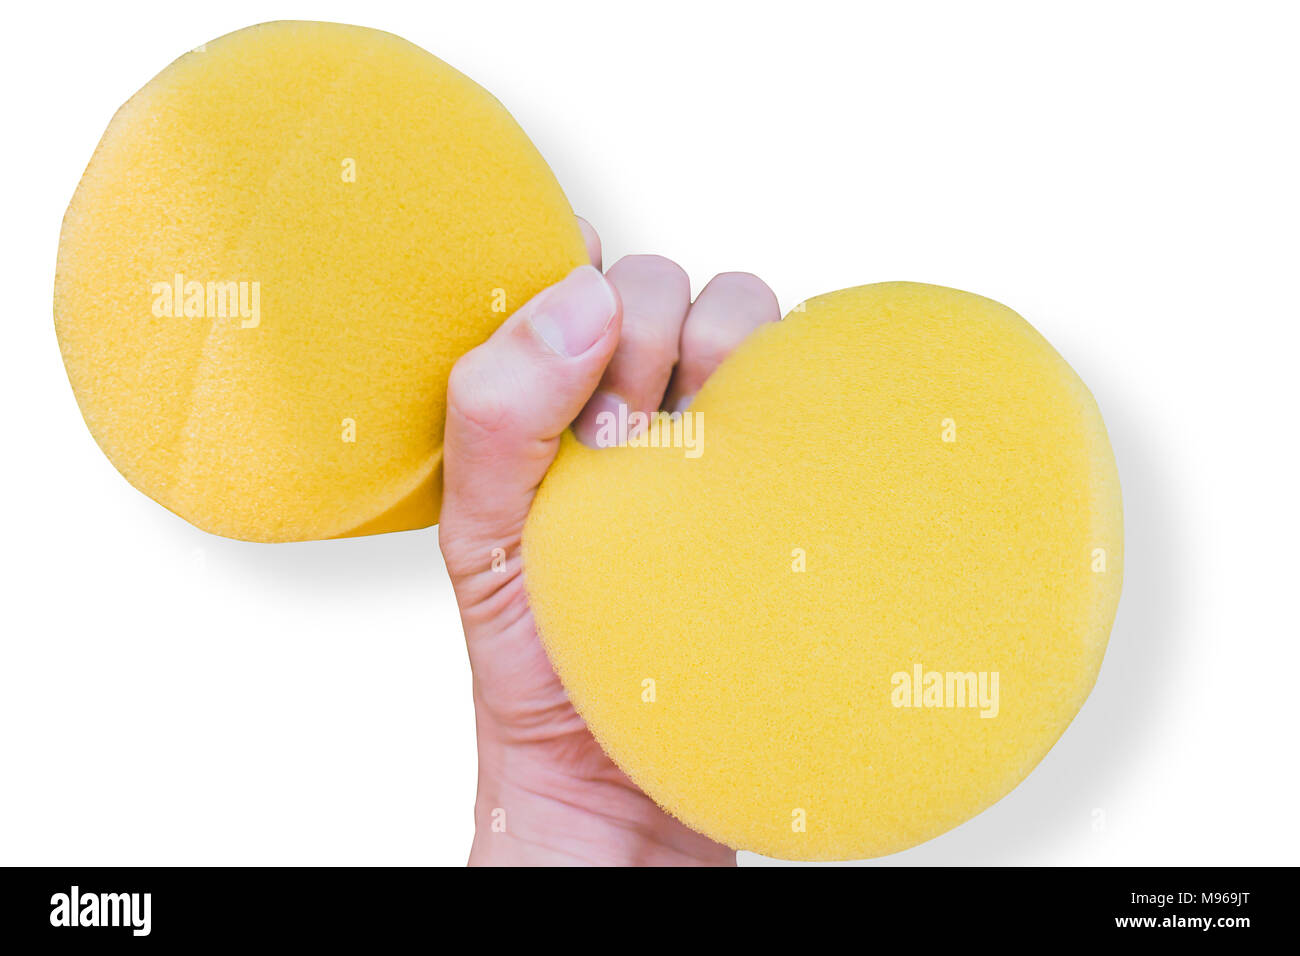 Squeeze main Sponge isolated on white with clipping path Banque D'Images